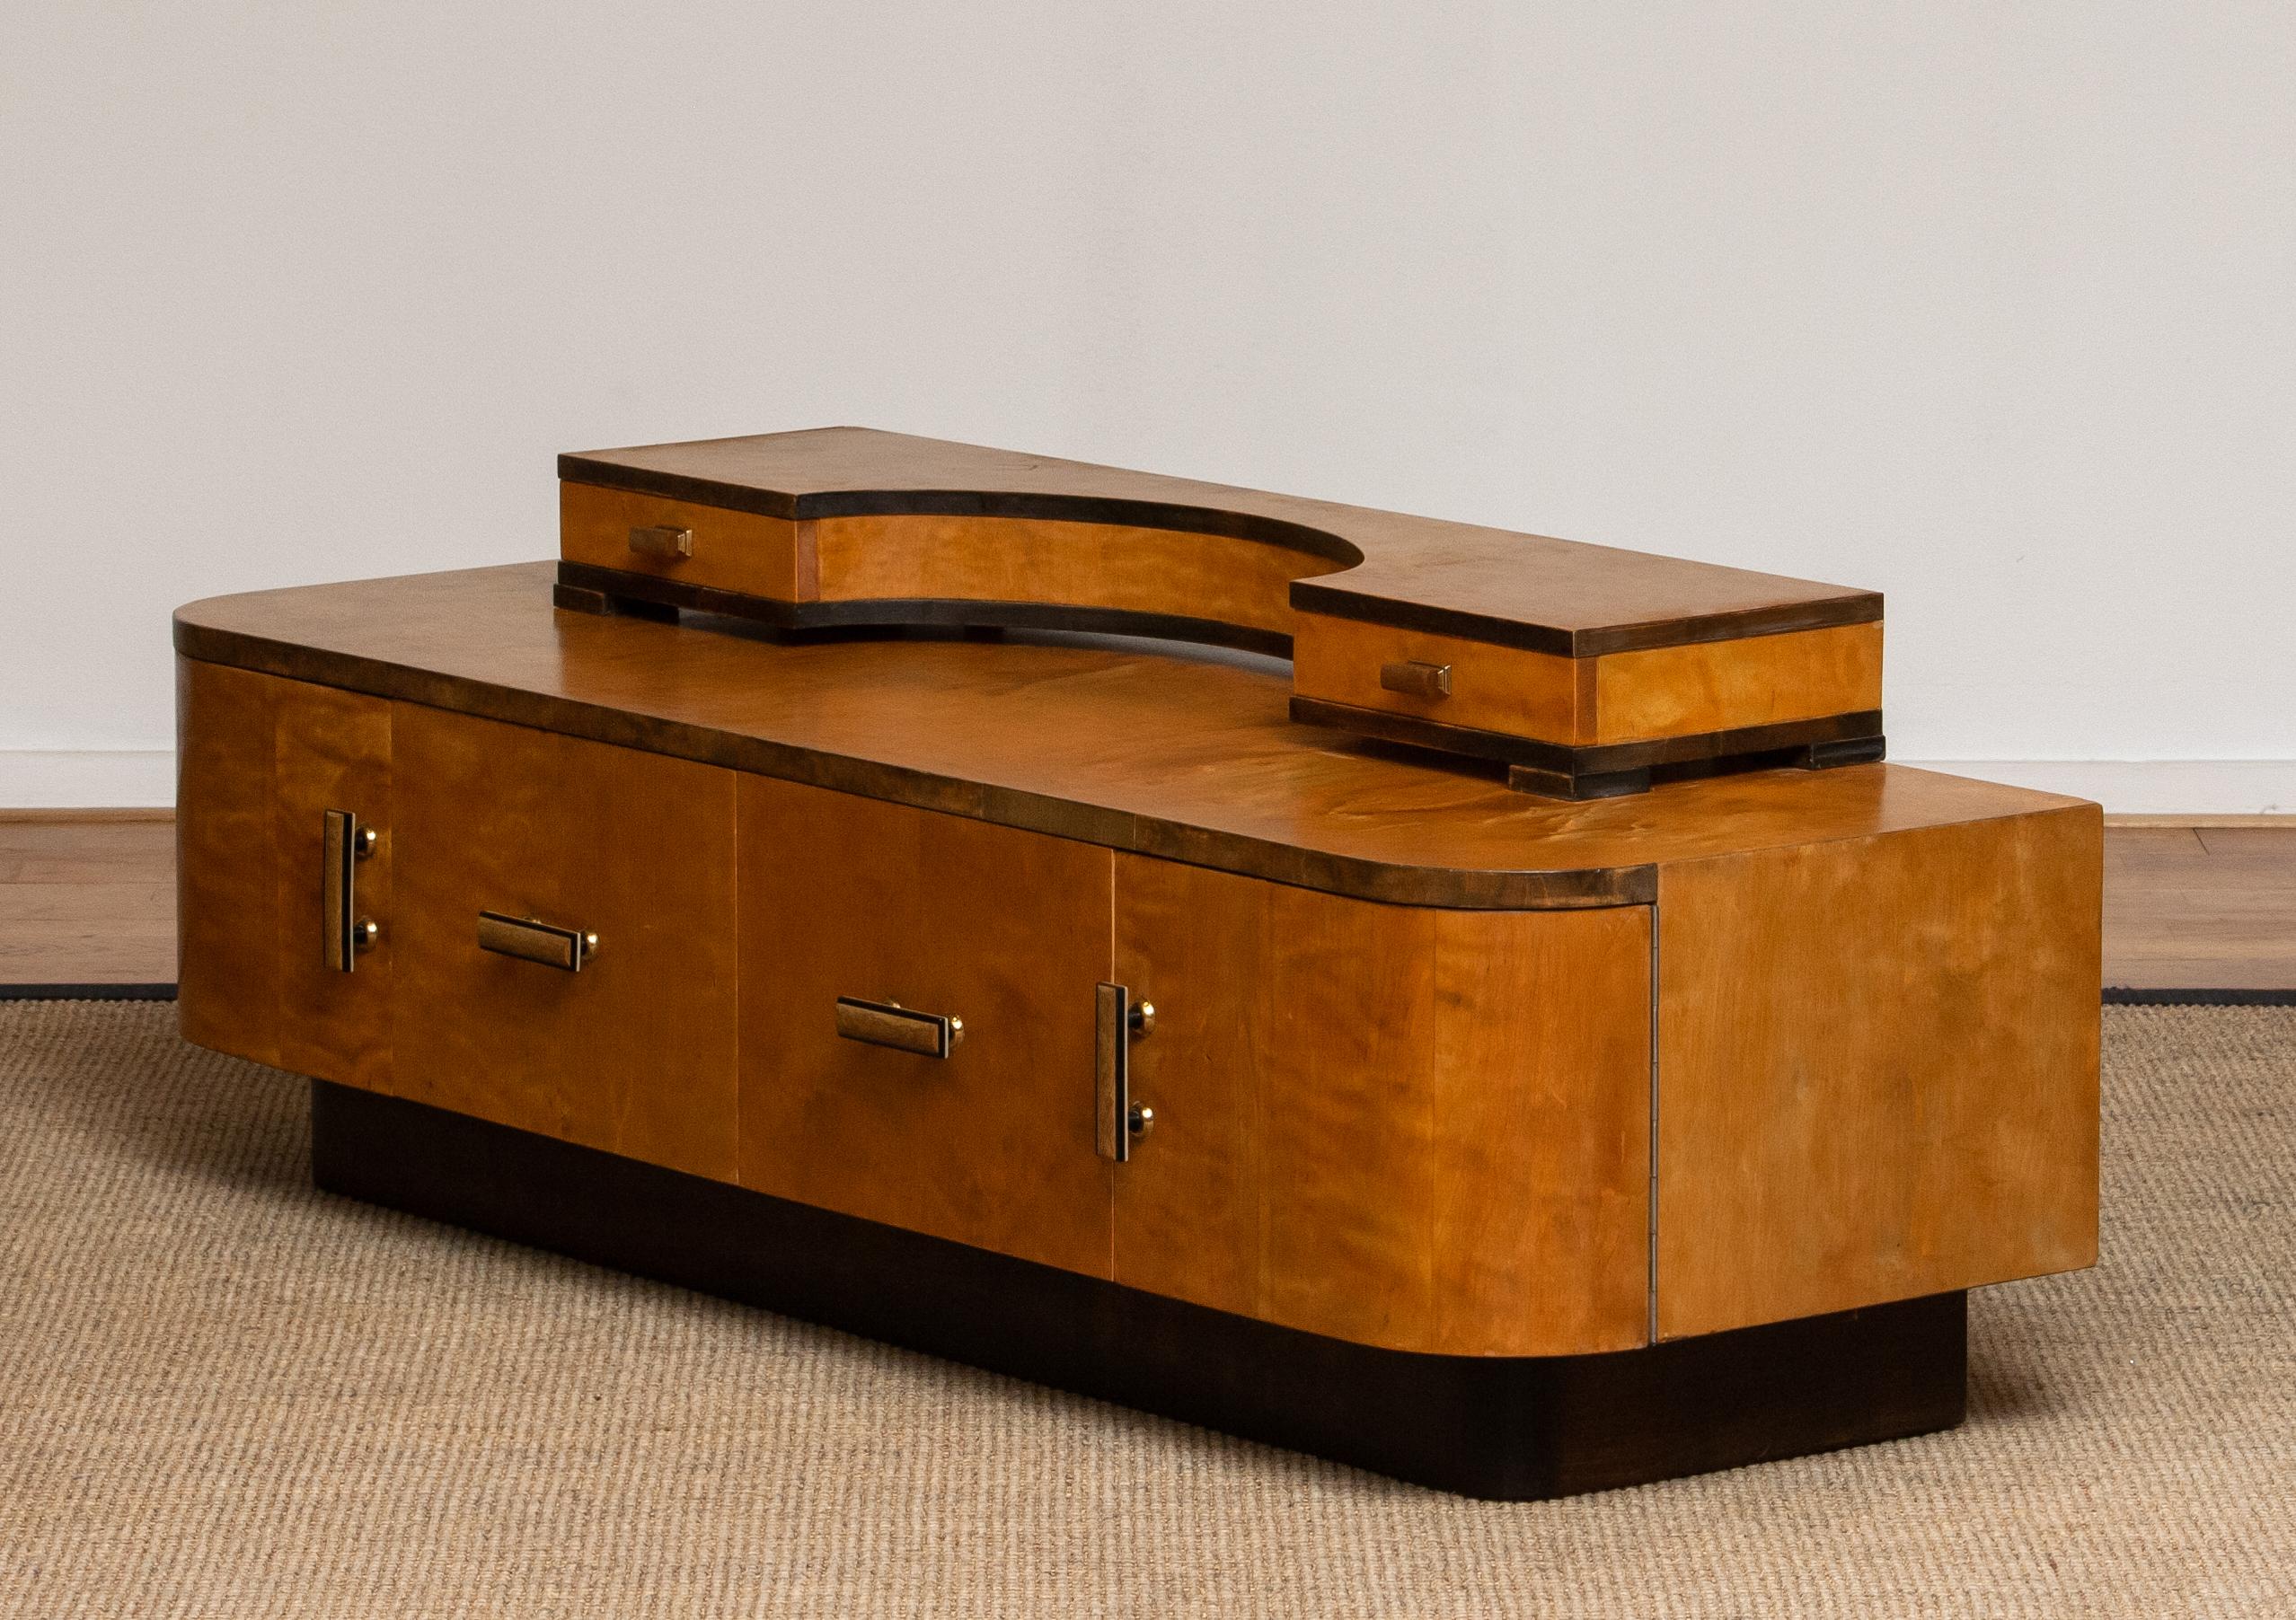 Exceptionally rare and beautiful Art Deco vanity or low board in birch from Norway and attributed to Eliel Saarinen, 1930s.
This vanity has two drawers as well as two drawers with rotary mechanism. On top there are two small drawers as well.
It's